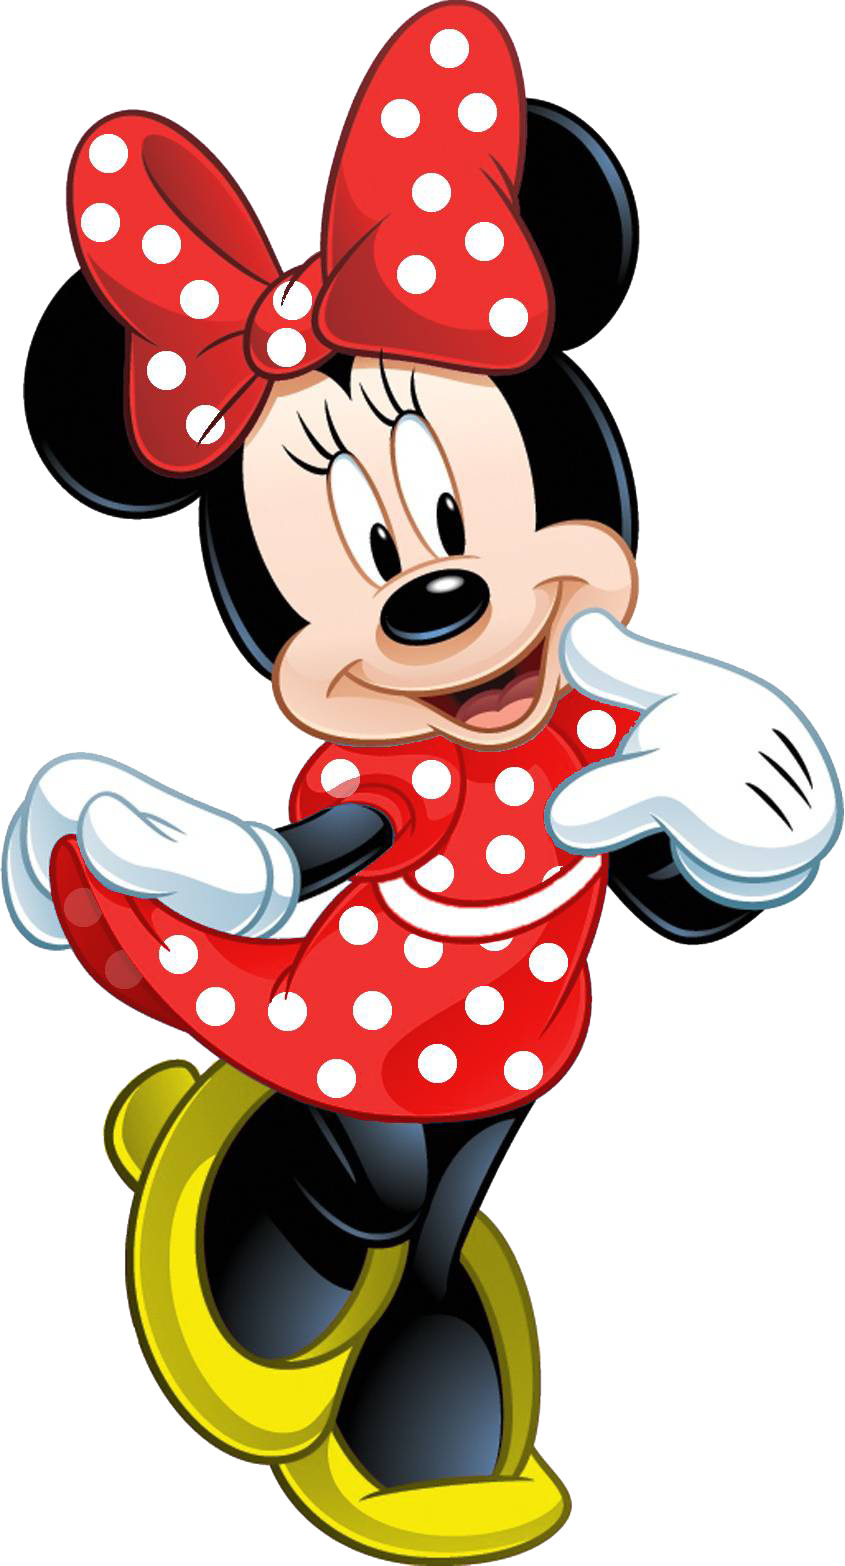 Download Minnie Mouse Picture HQ PNG Image | FreePNGImg